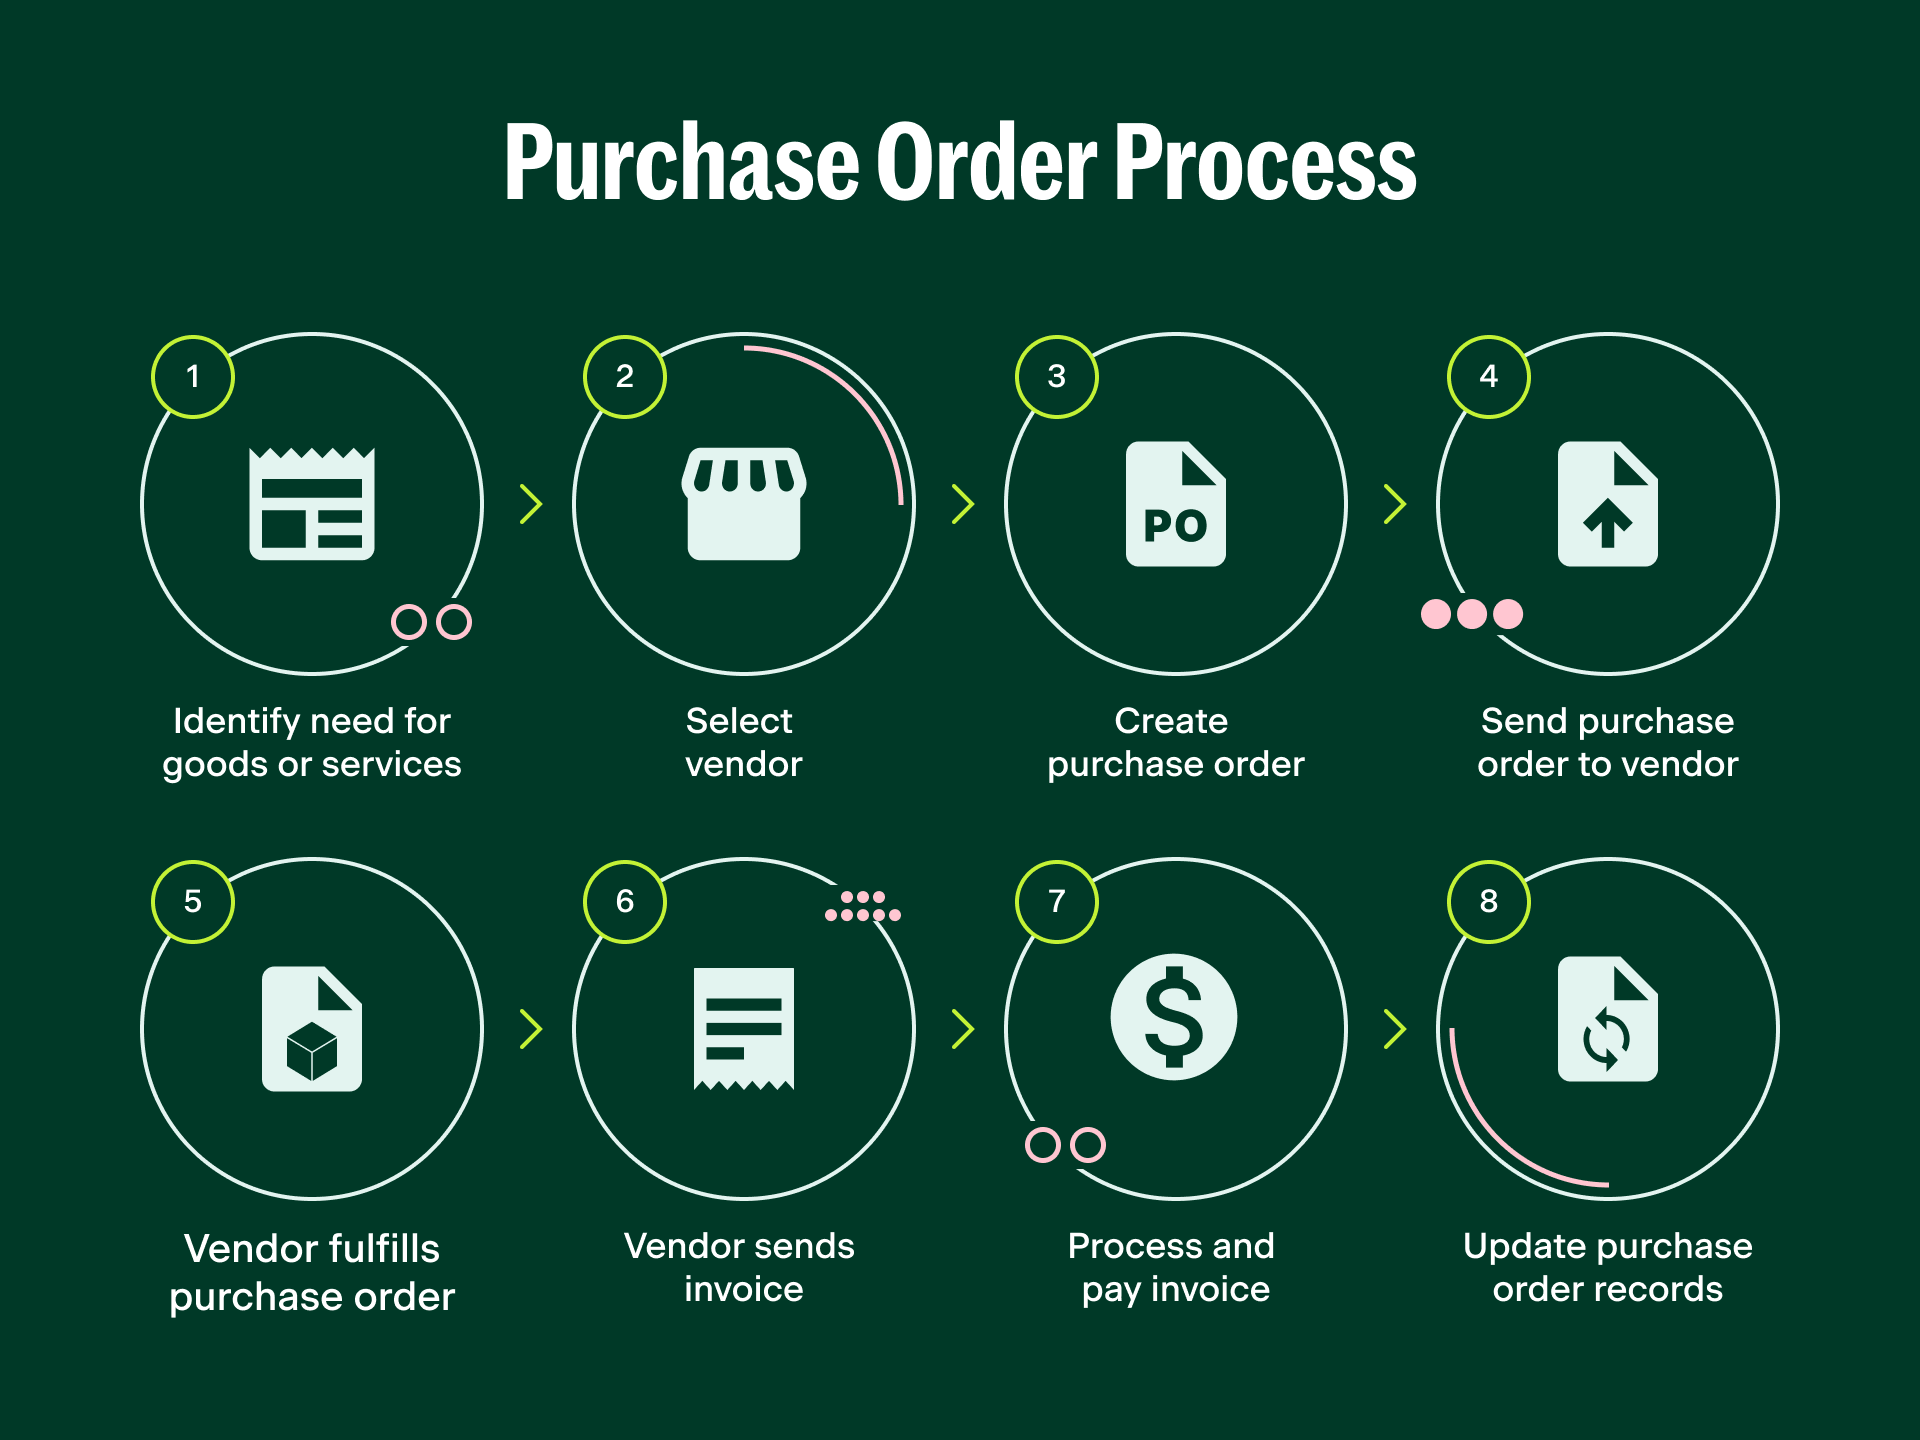 The Purchase Order Journey: What are the steps of a PO?